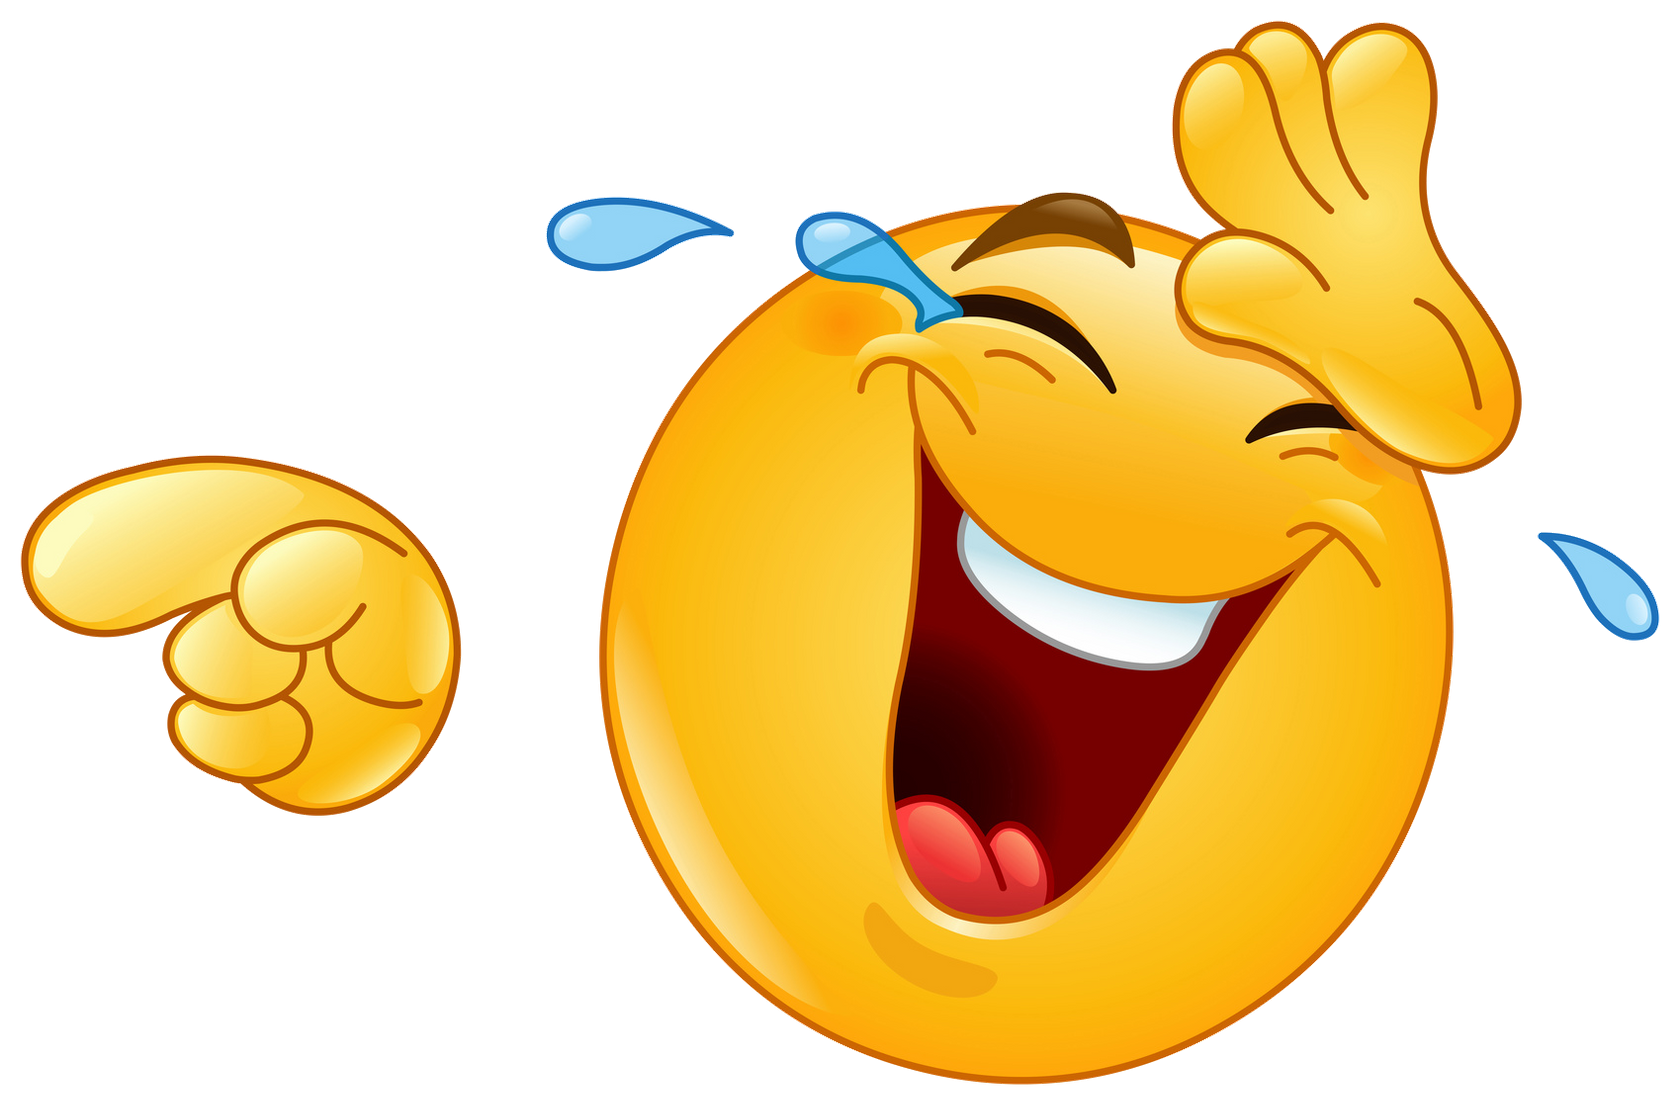 Laughing clipart cartoon, Laughing cartoon Transparent FREE for